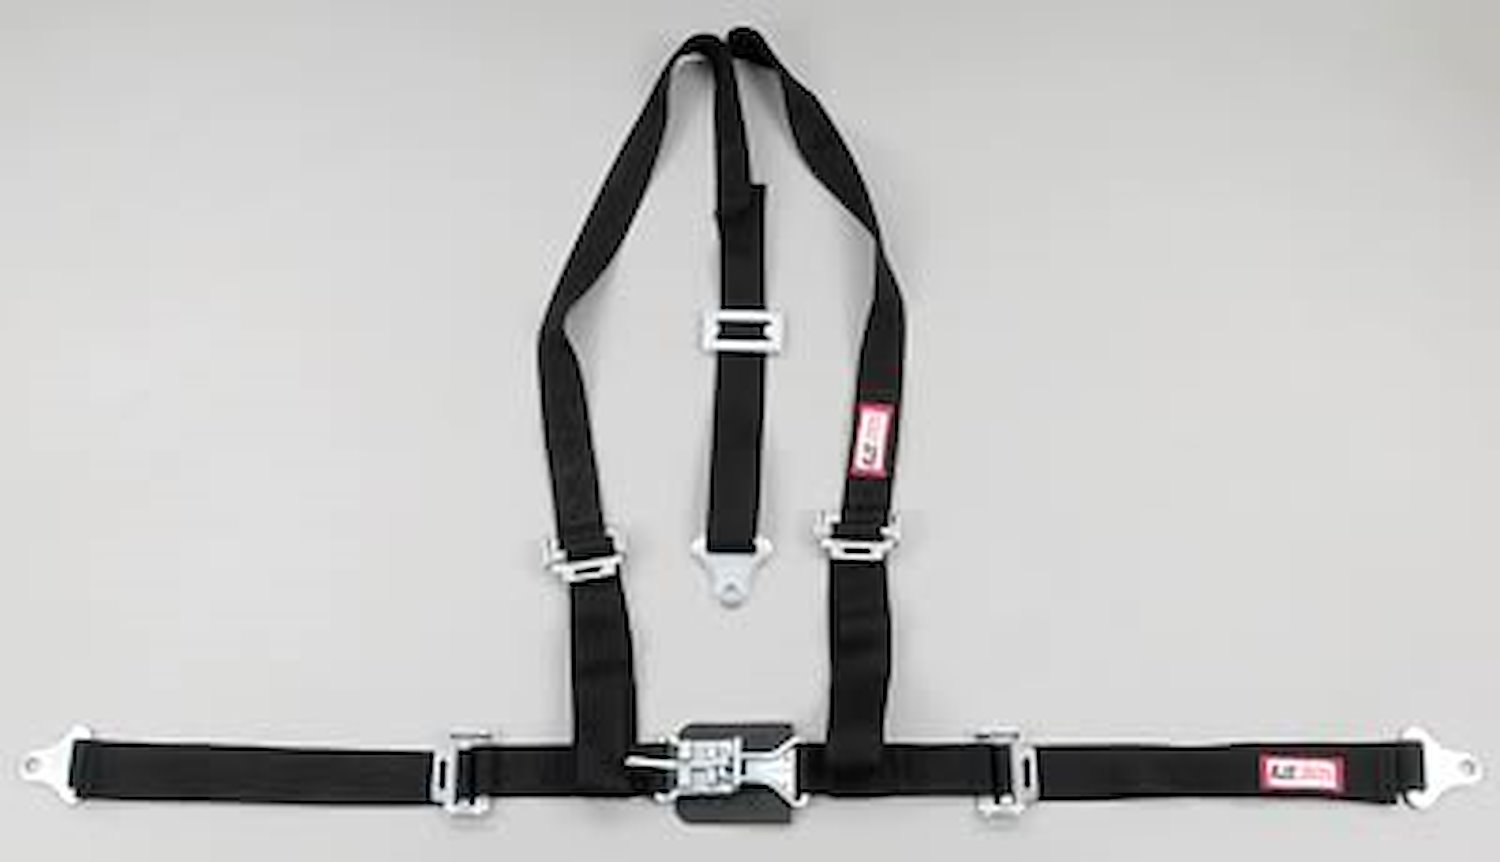 NON-SFI L&L HARNESS 3 PULL DOWN Lap BELT SNAP SEWN IN 2 S.H. Y FLOOR Mount WRAP/BOLT BLUE